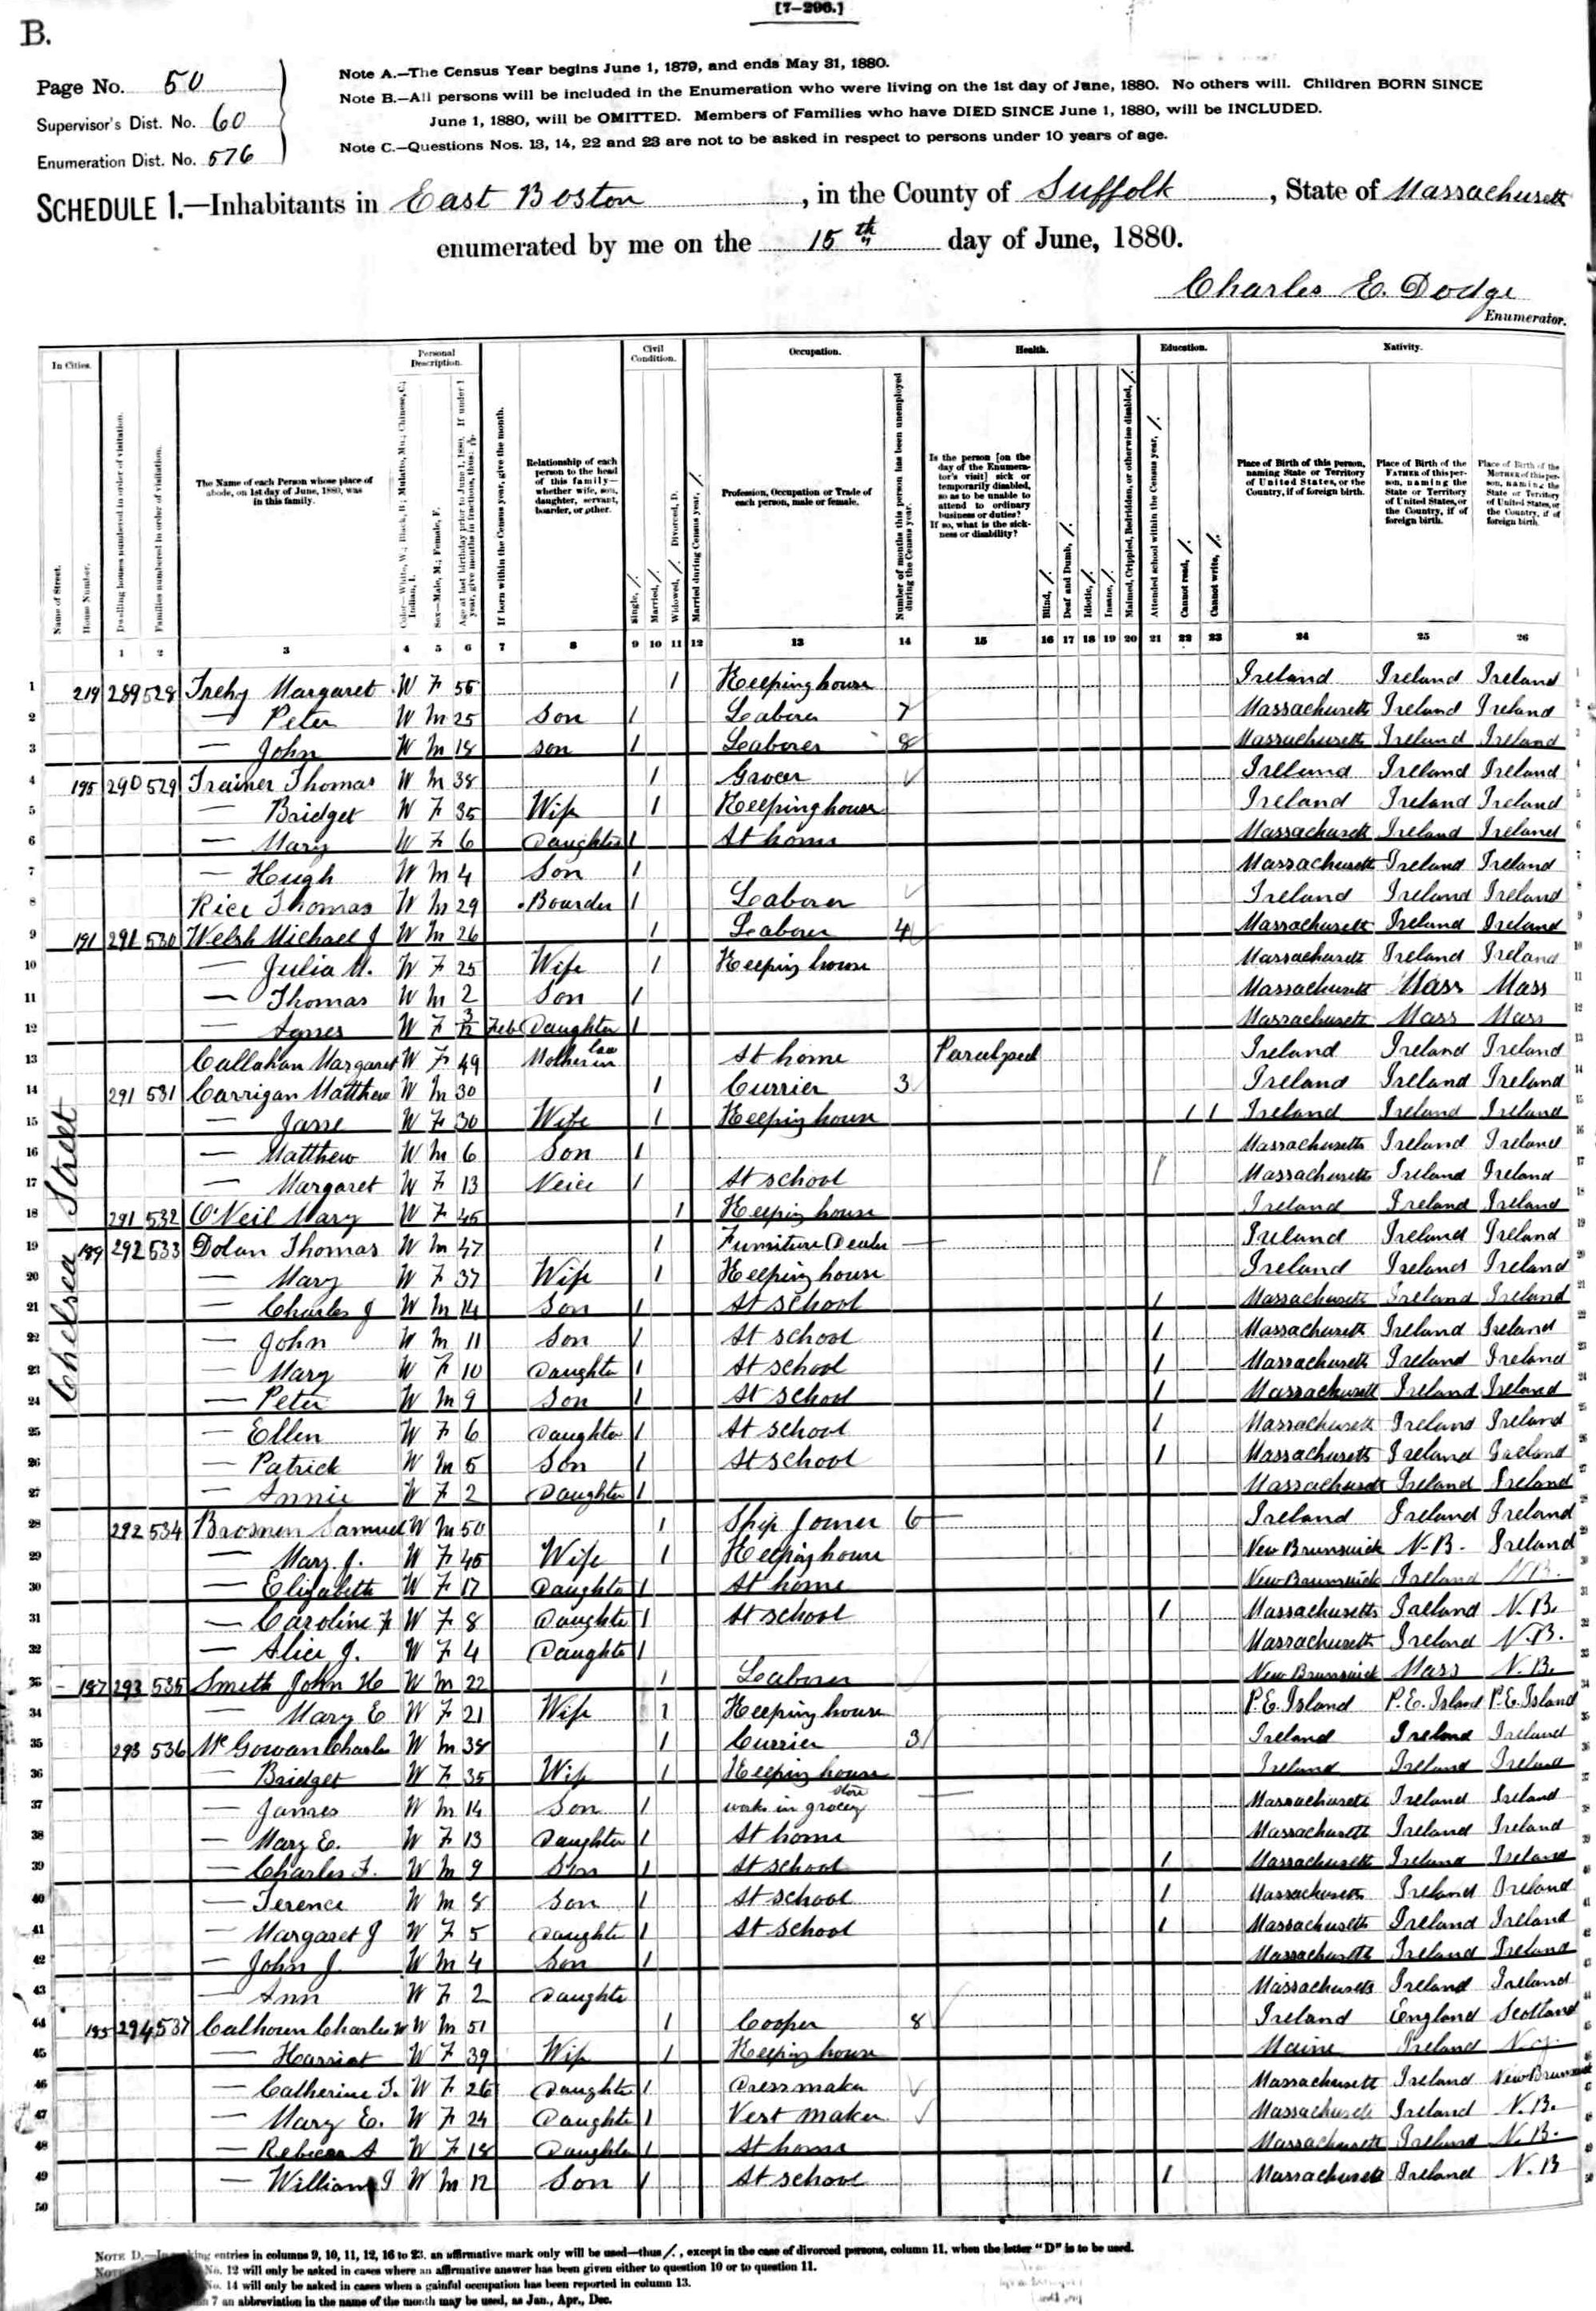 Image of an 1880 census page